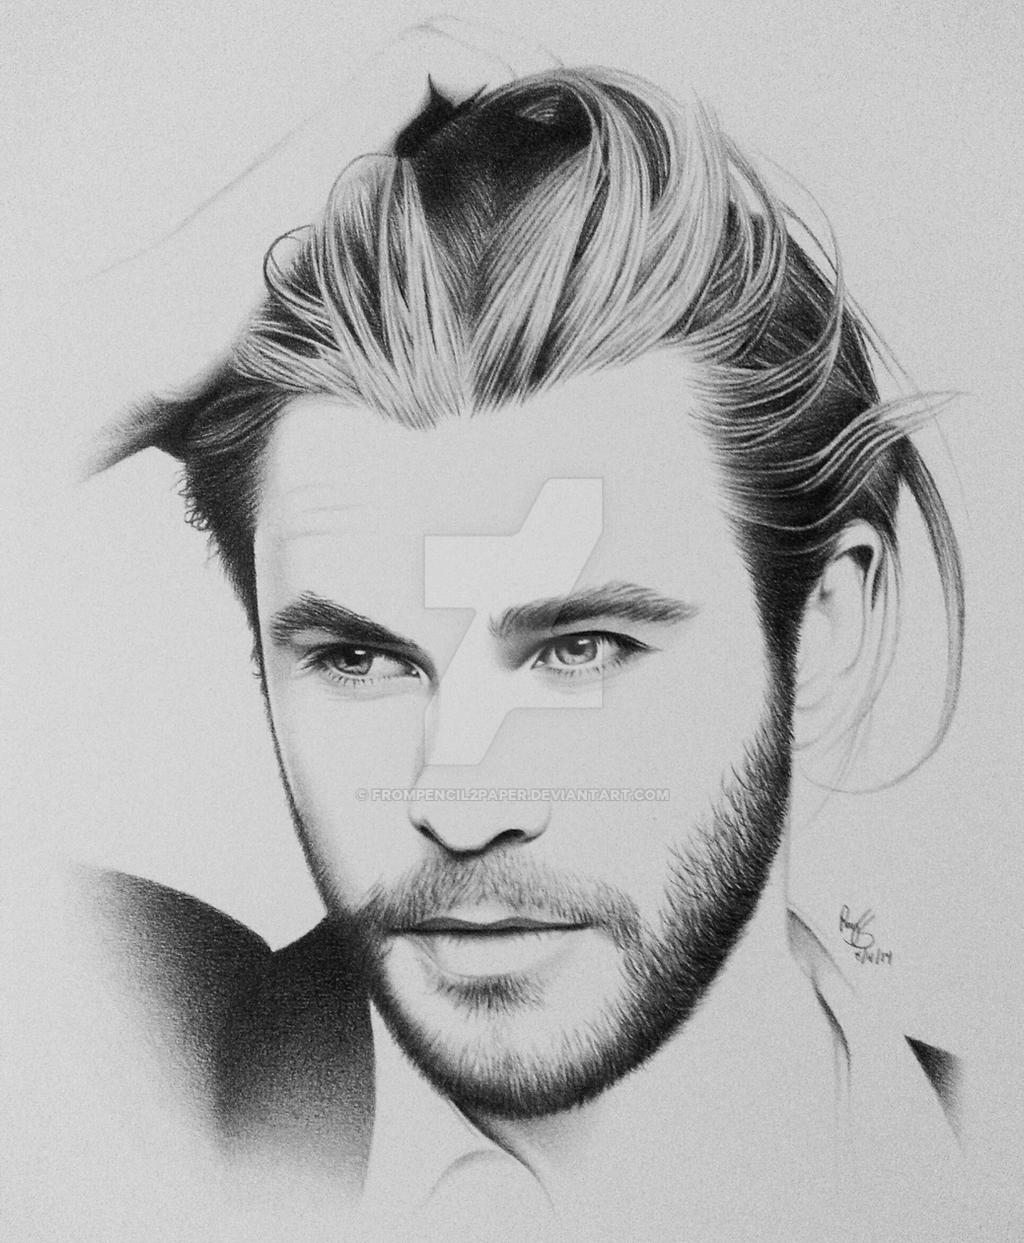  Chris Hemsworth by FromPencil2Paper on DeviantArt